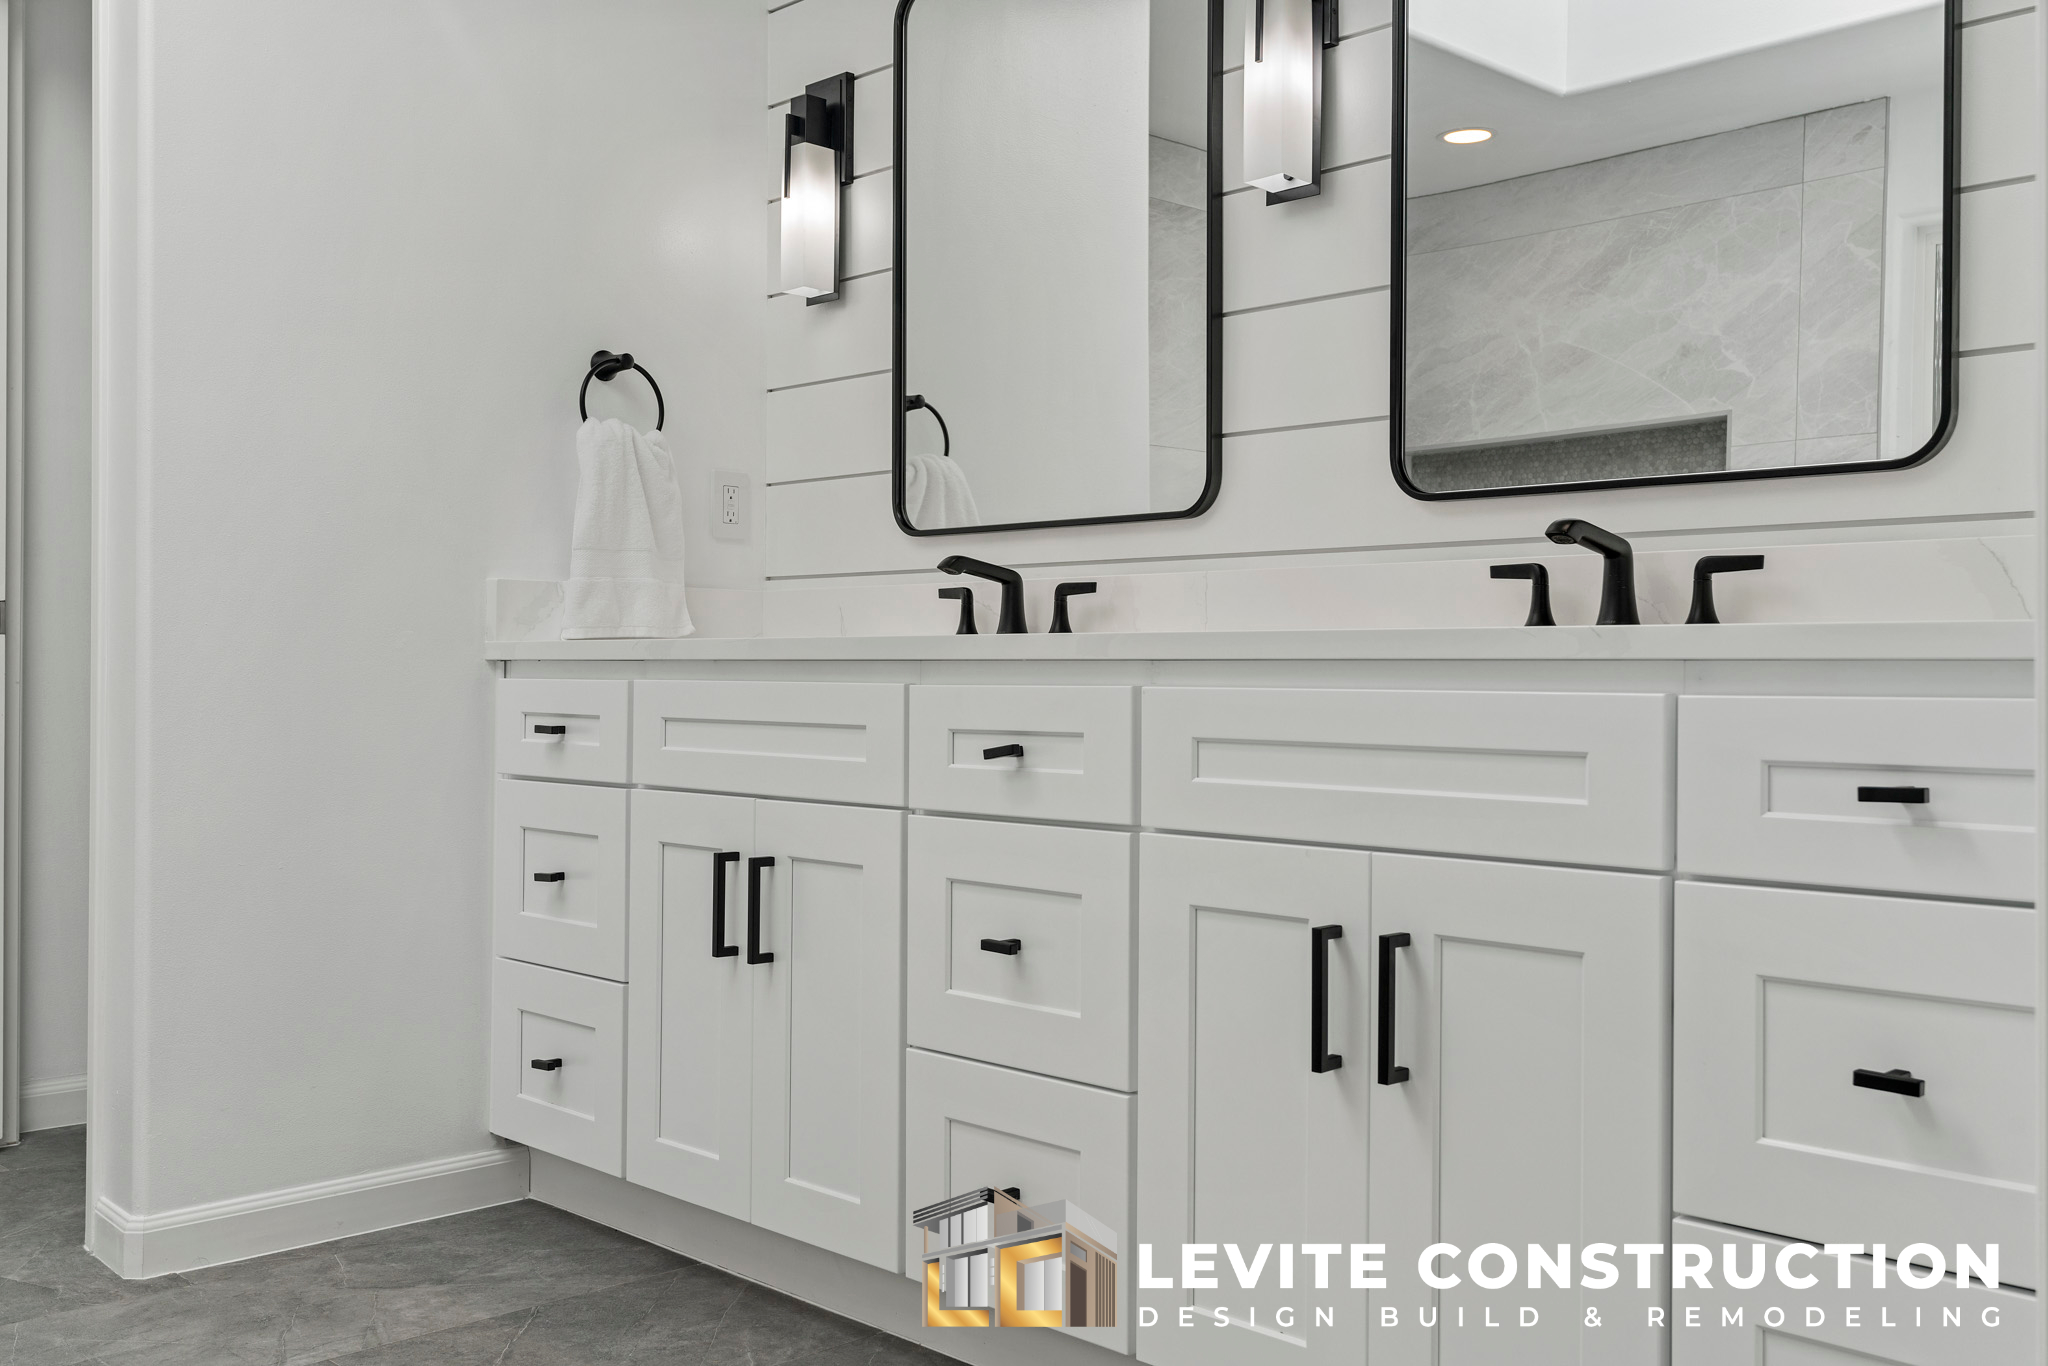 Seattle General Contractor Complete Remodeling Experts - Levite Construction Co.